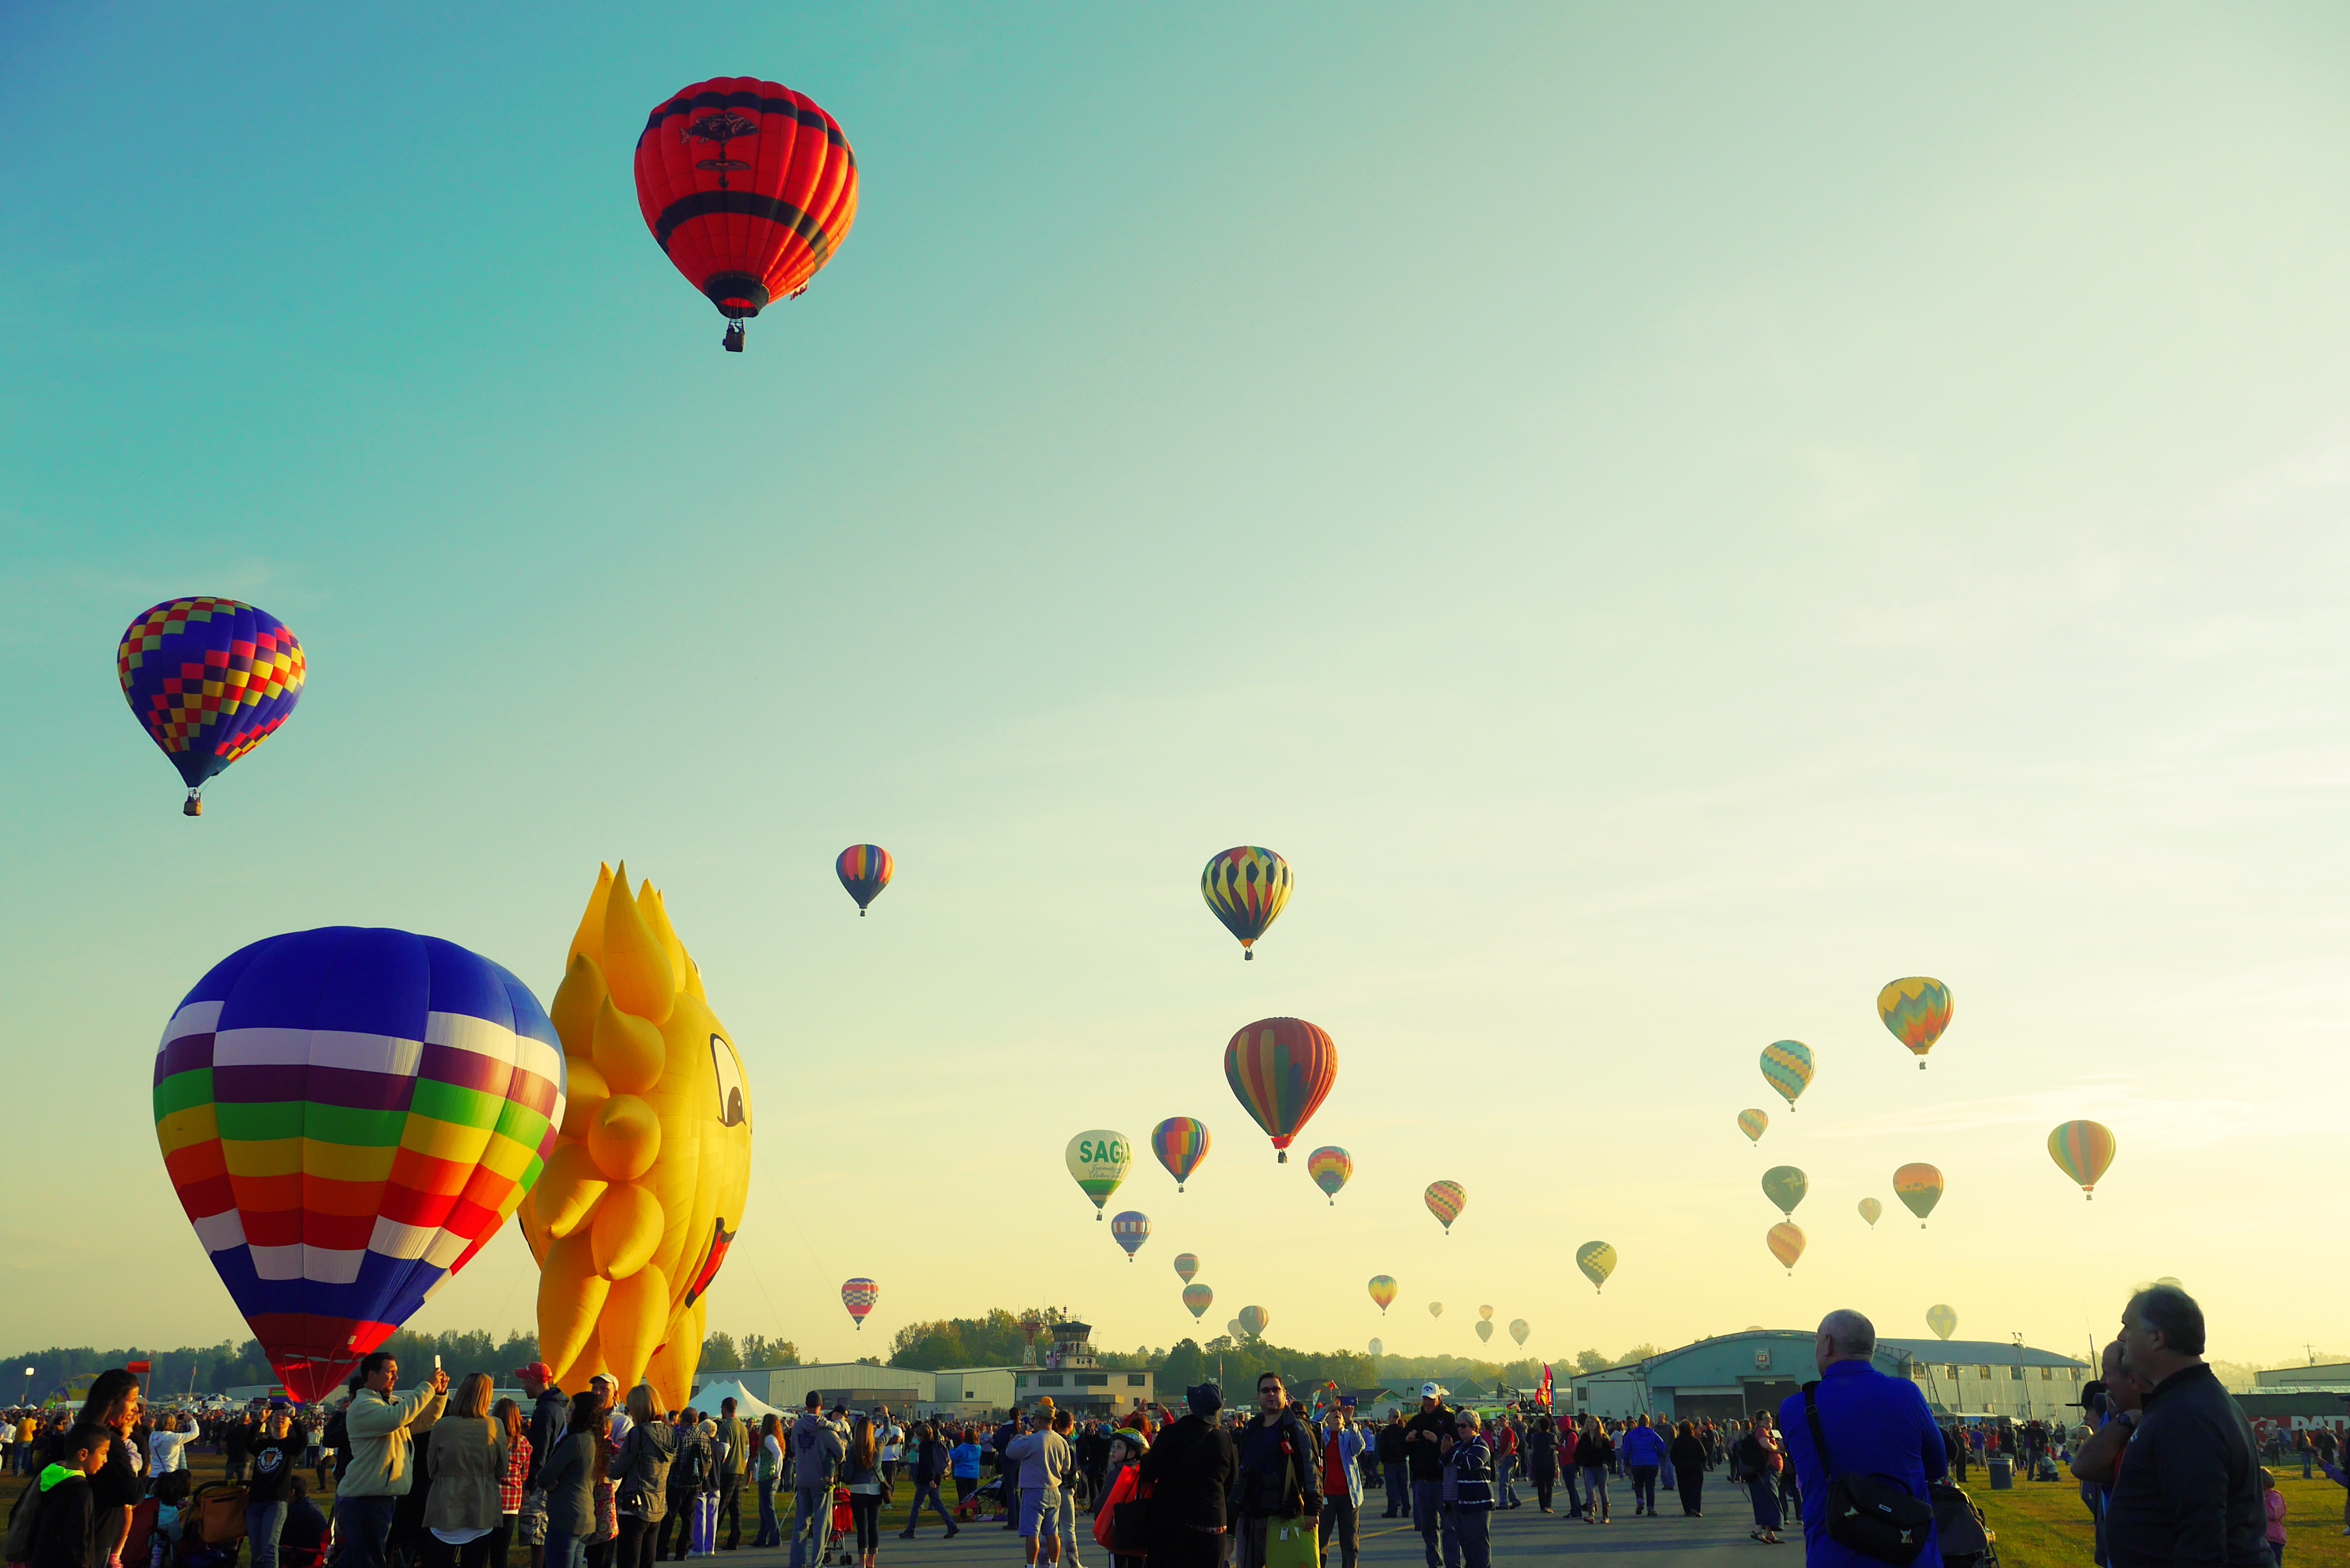 Chris took a trip to upstate NY and enjoyed the morning watching balloons. 